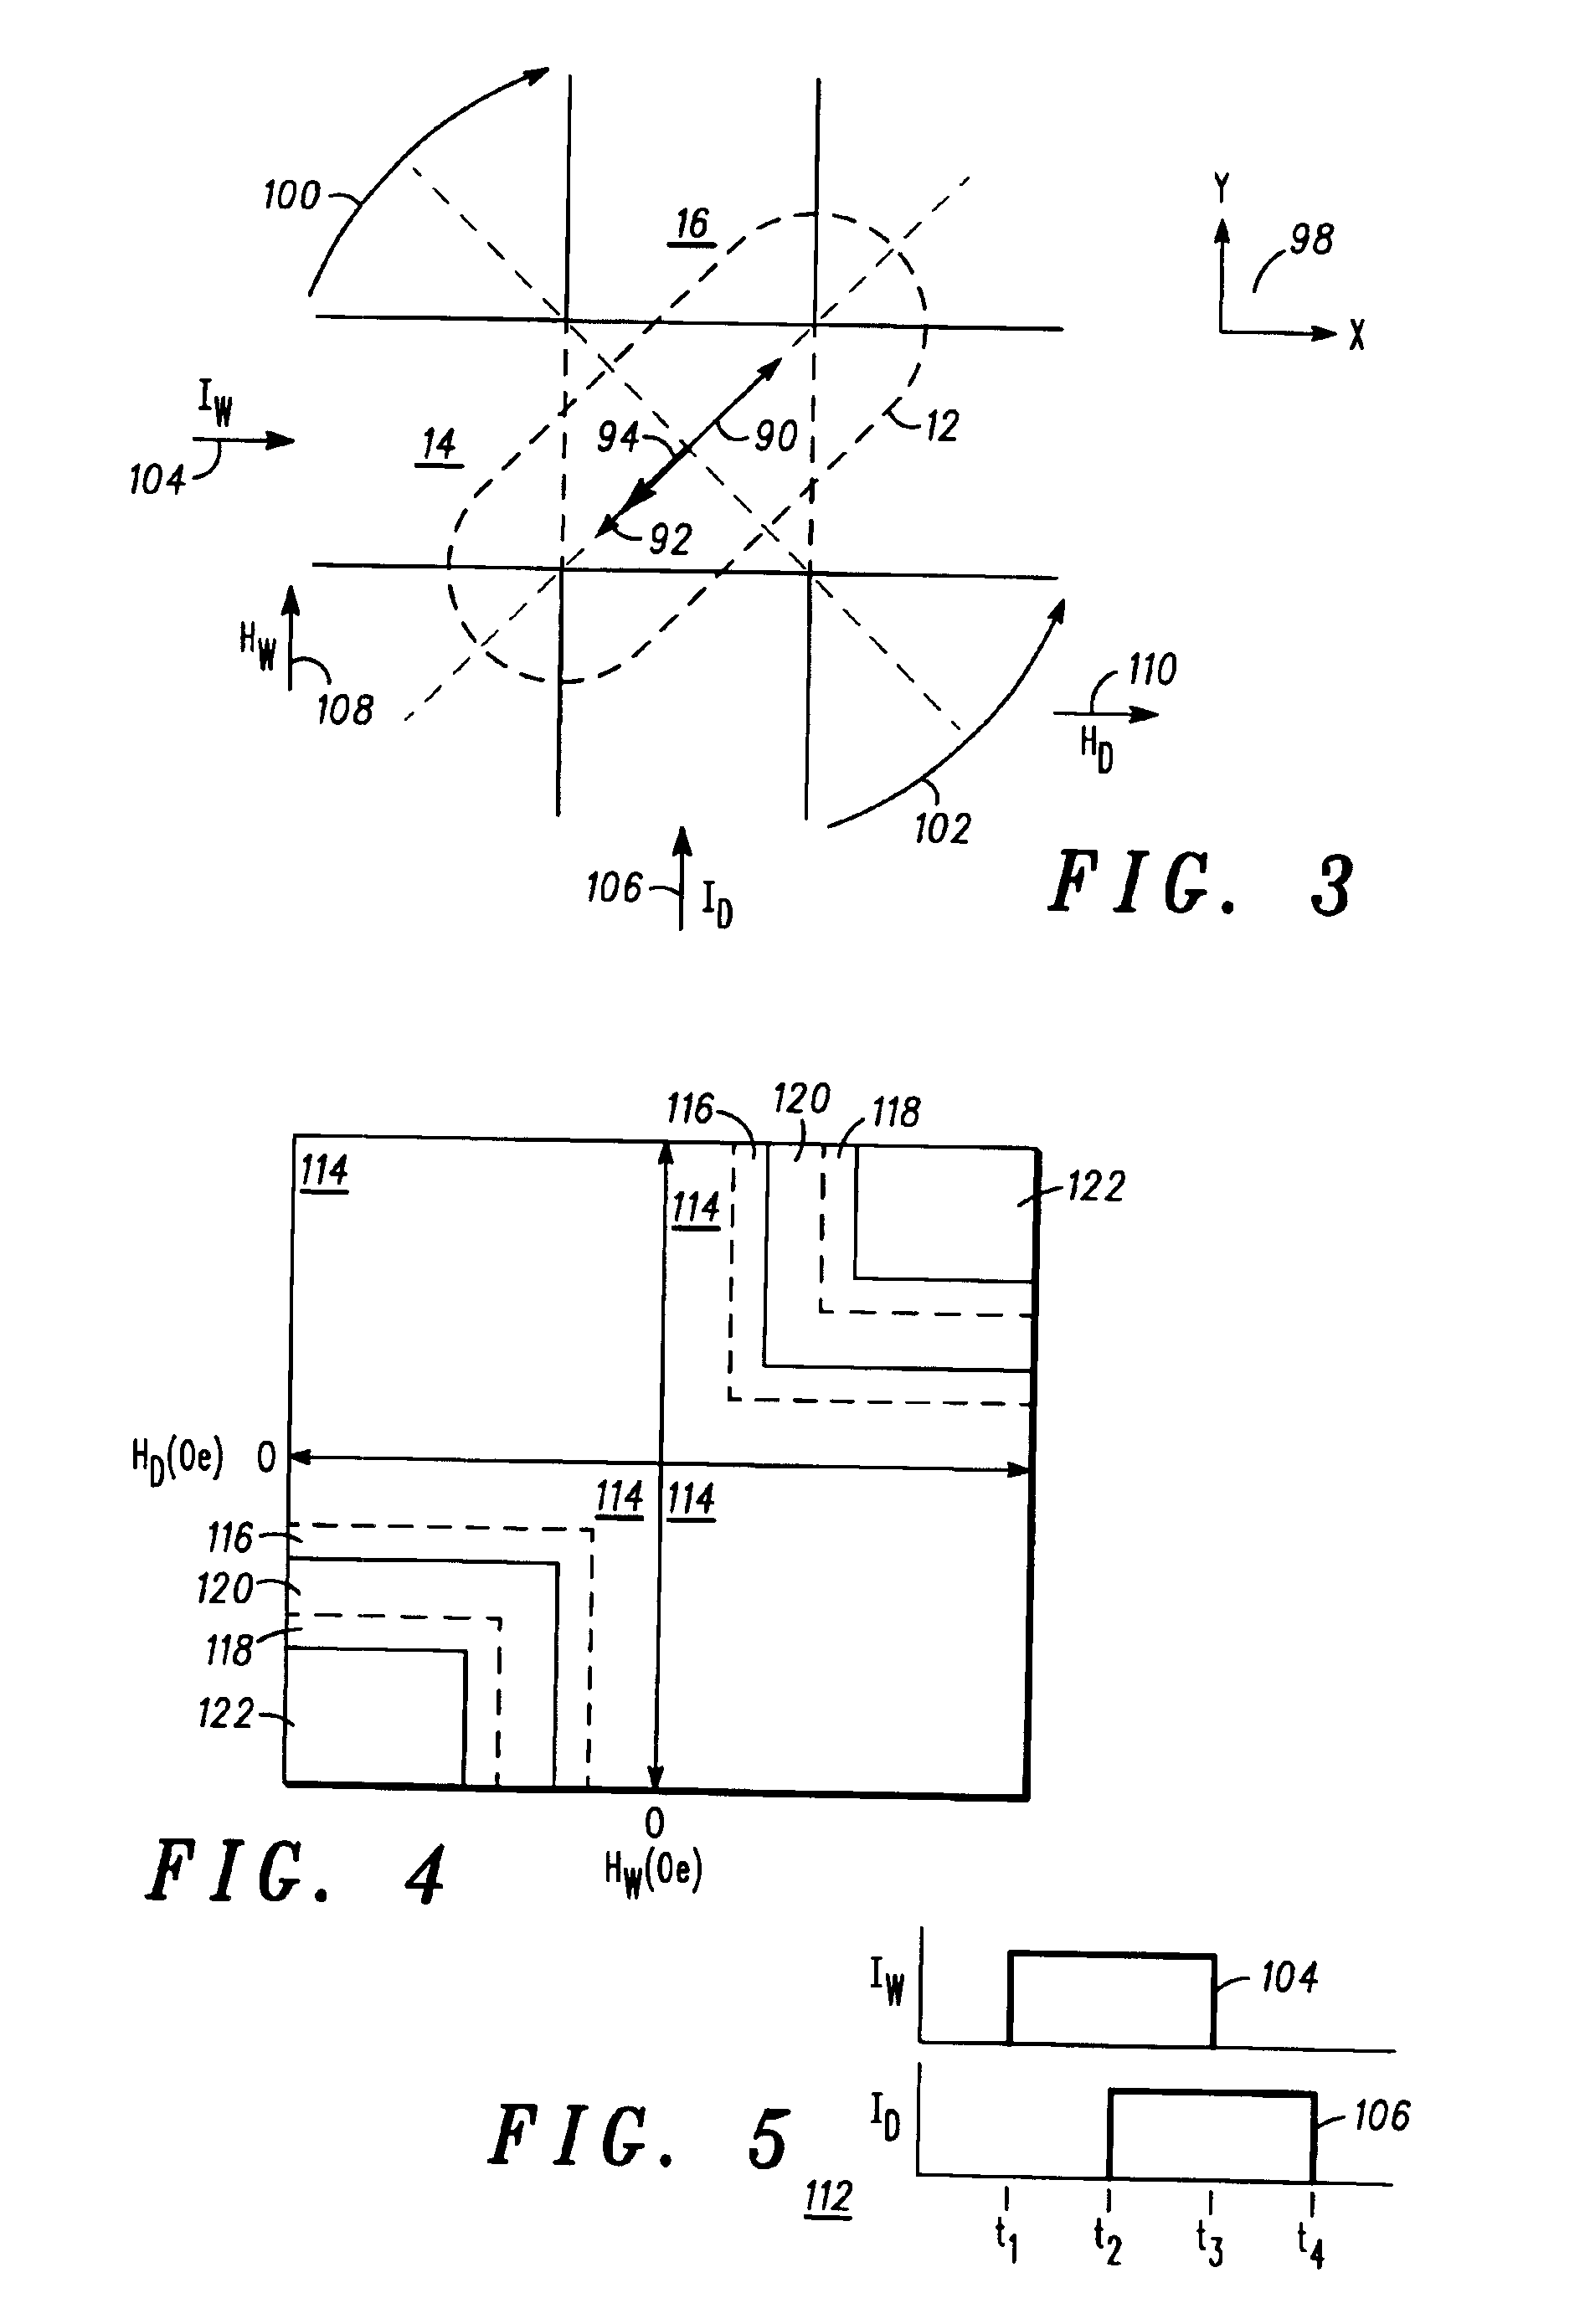 Method of writing to a multi-state magnetic random access memory cell